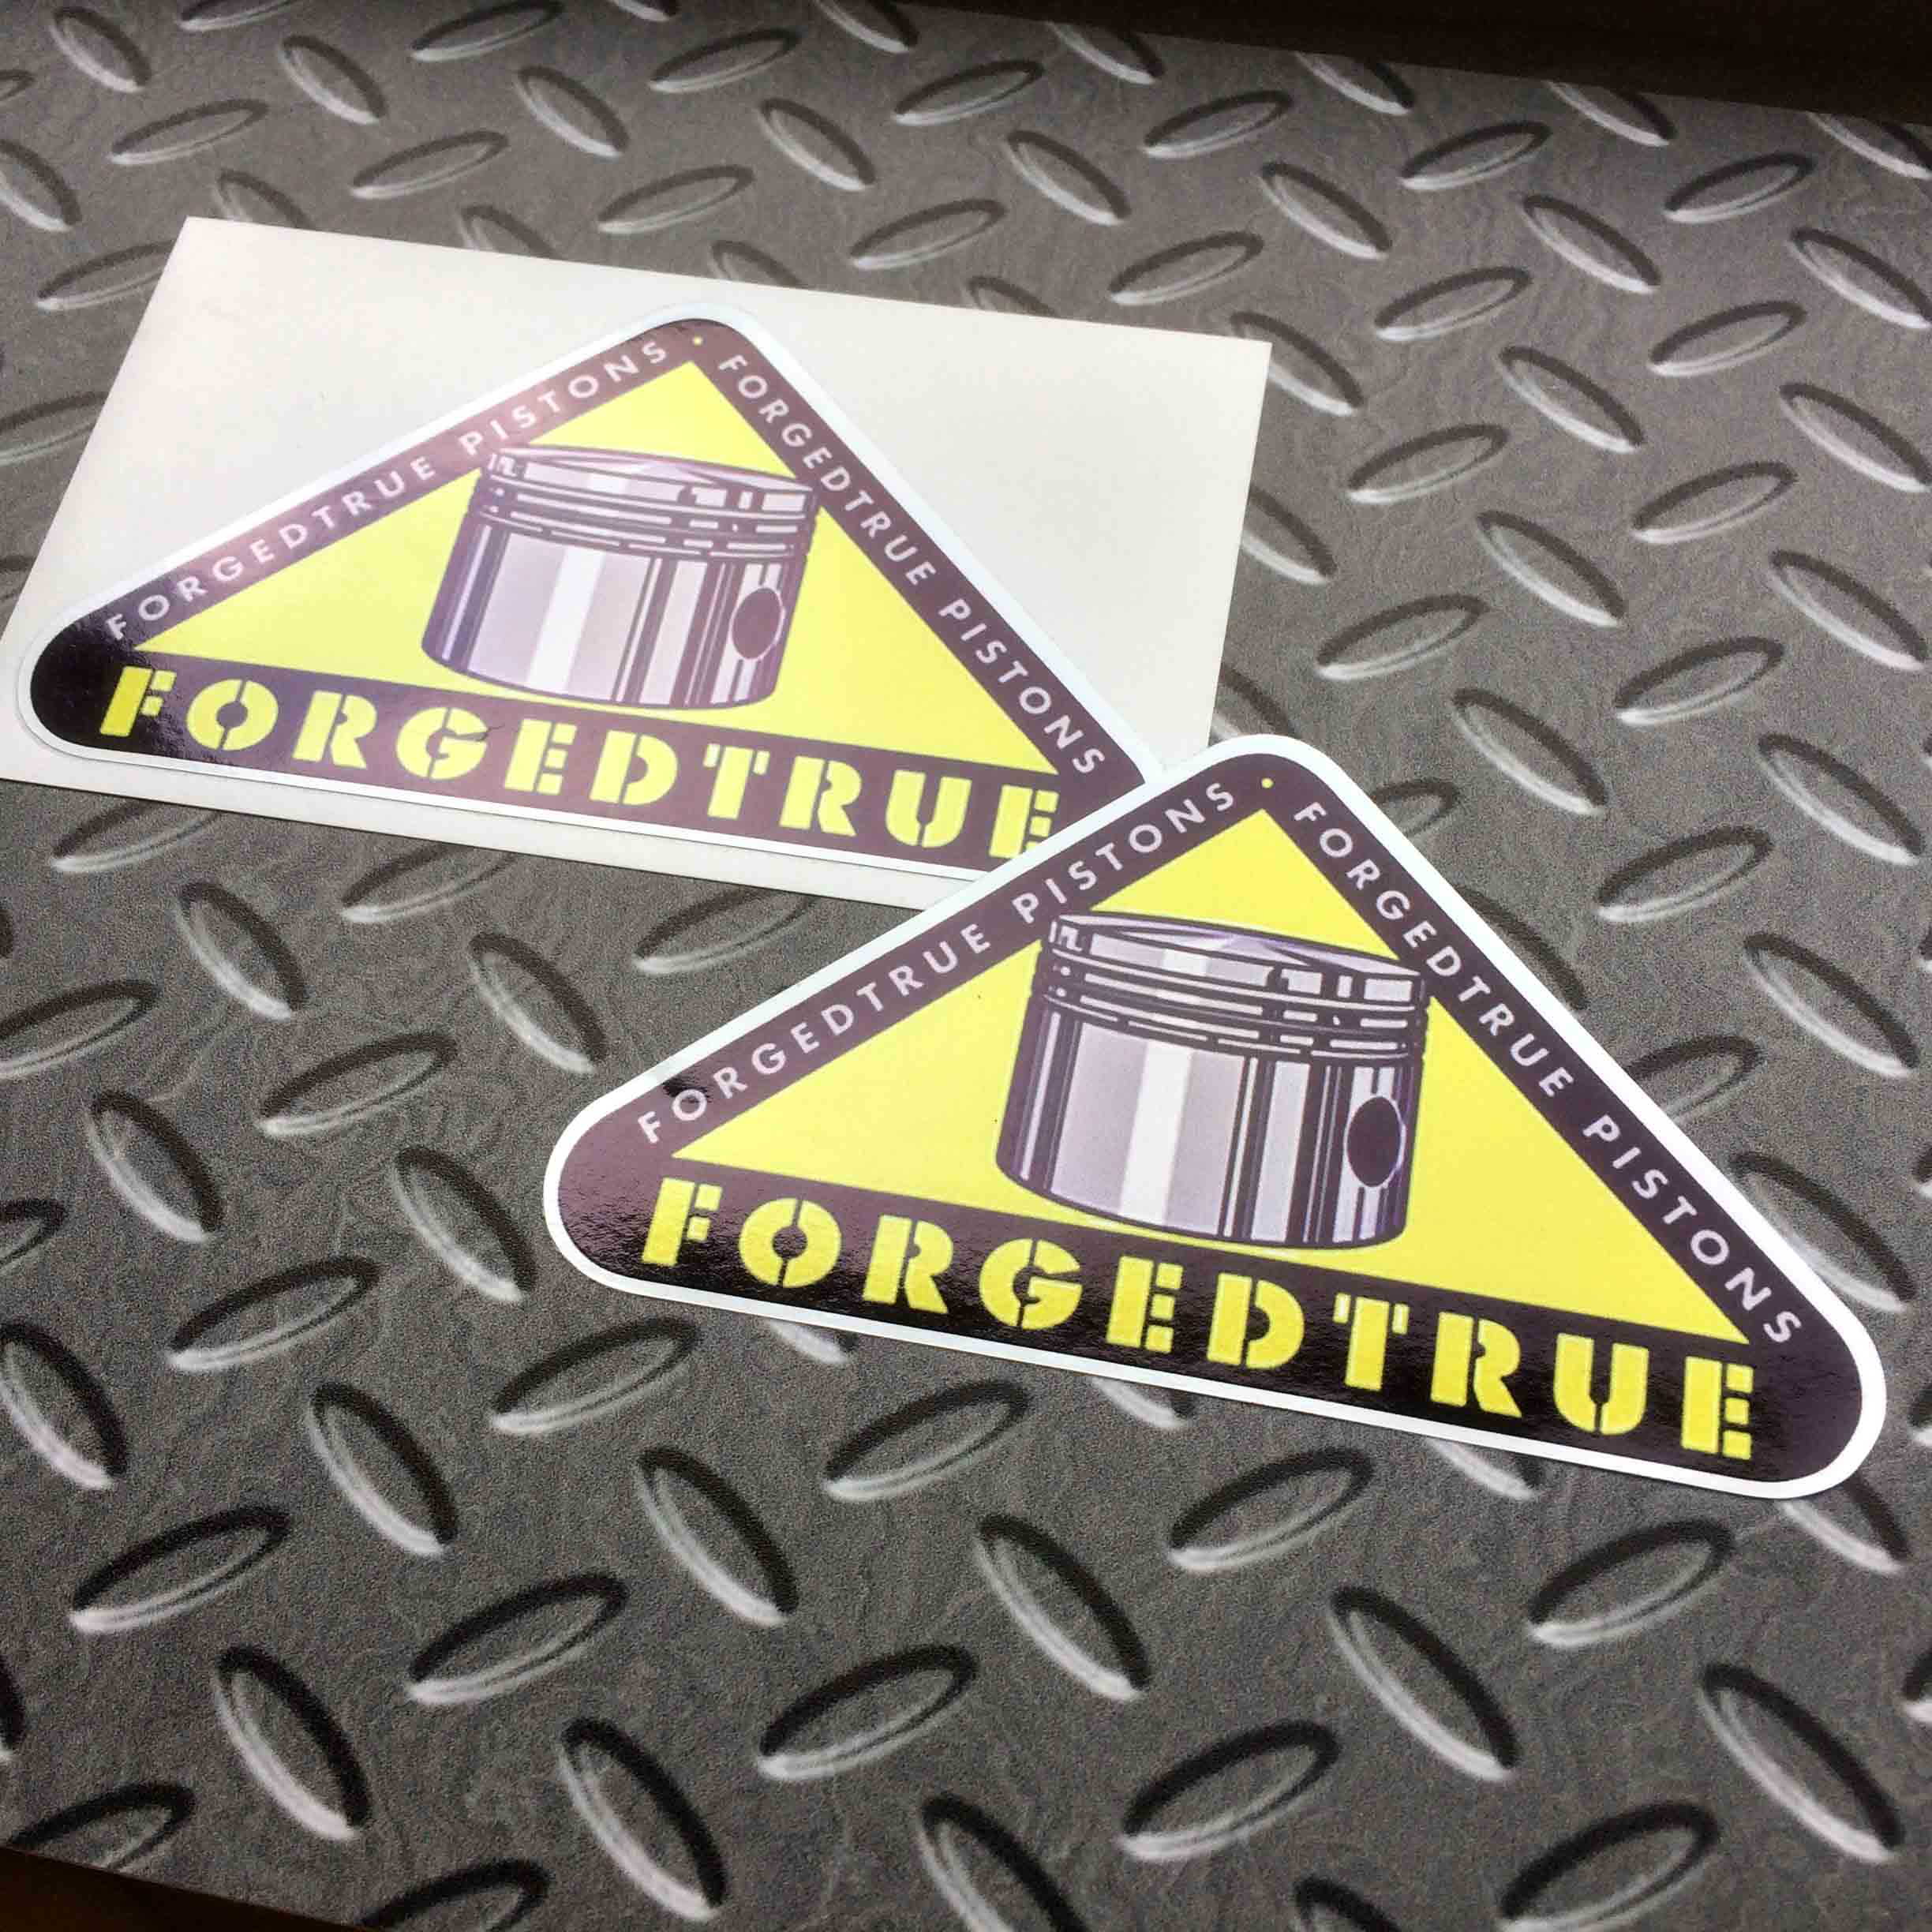 FORGEDTRUE PISTONS VINTAGE STICKERS. A piston on a yellow triangle bordered in black. Forgedtrue Pistons in grey lettering is along two sides. Forgedtrue in bold yellow lettering is across the base of the triangle.